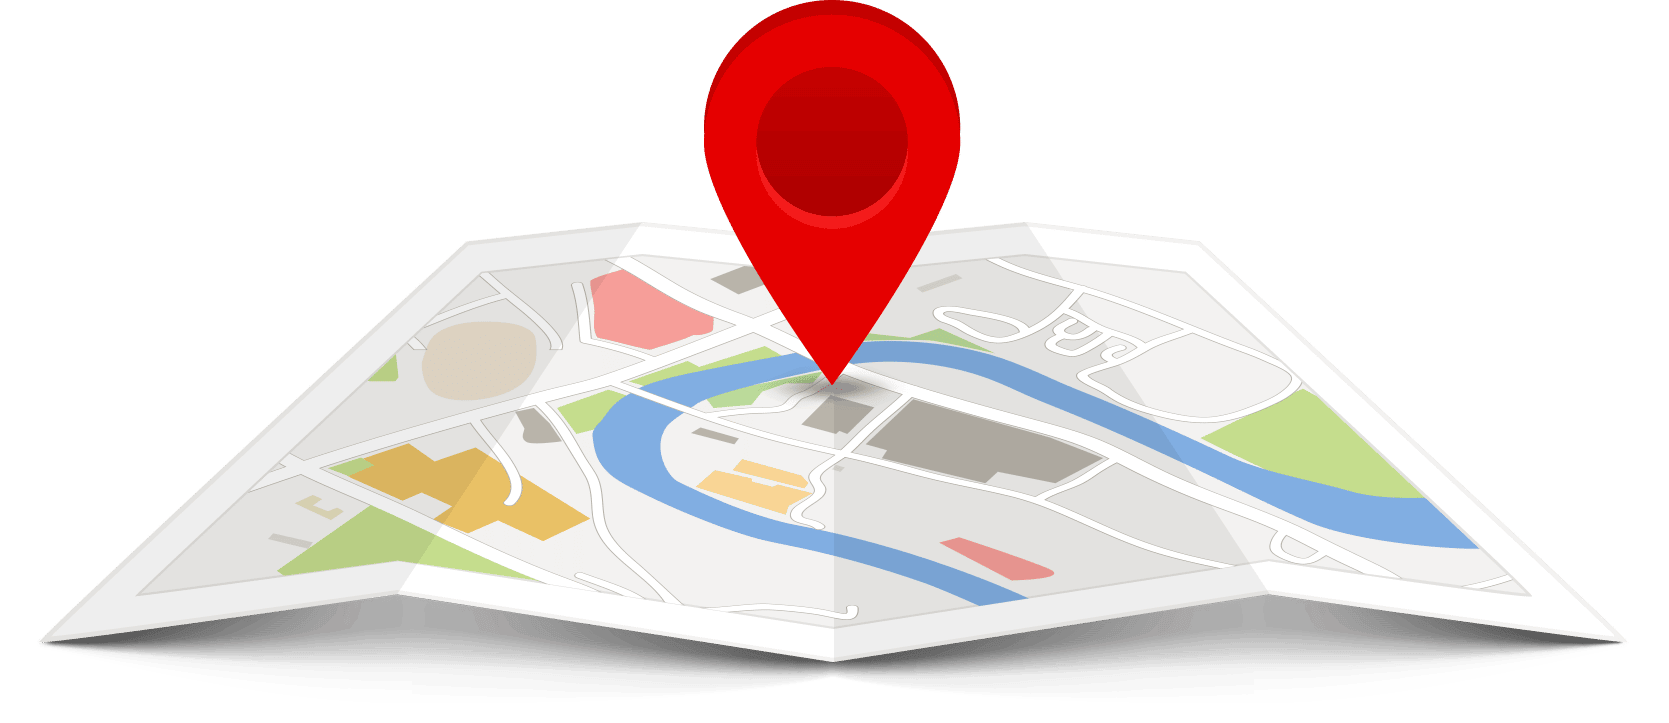 gps tracking application